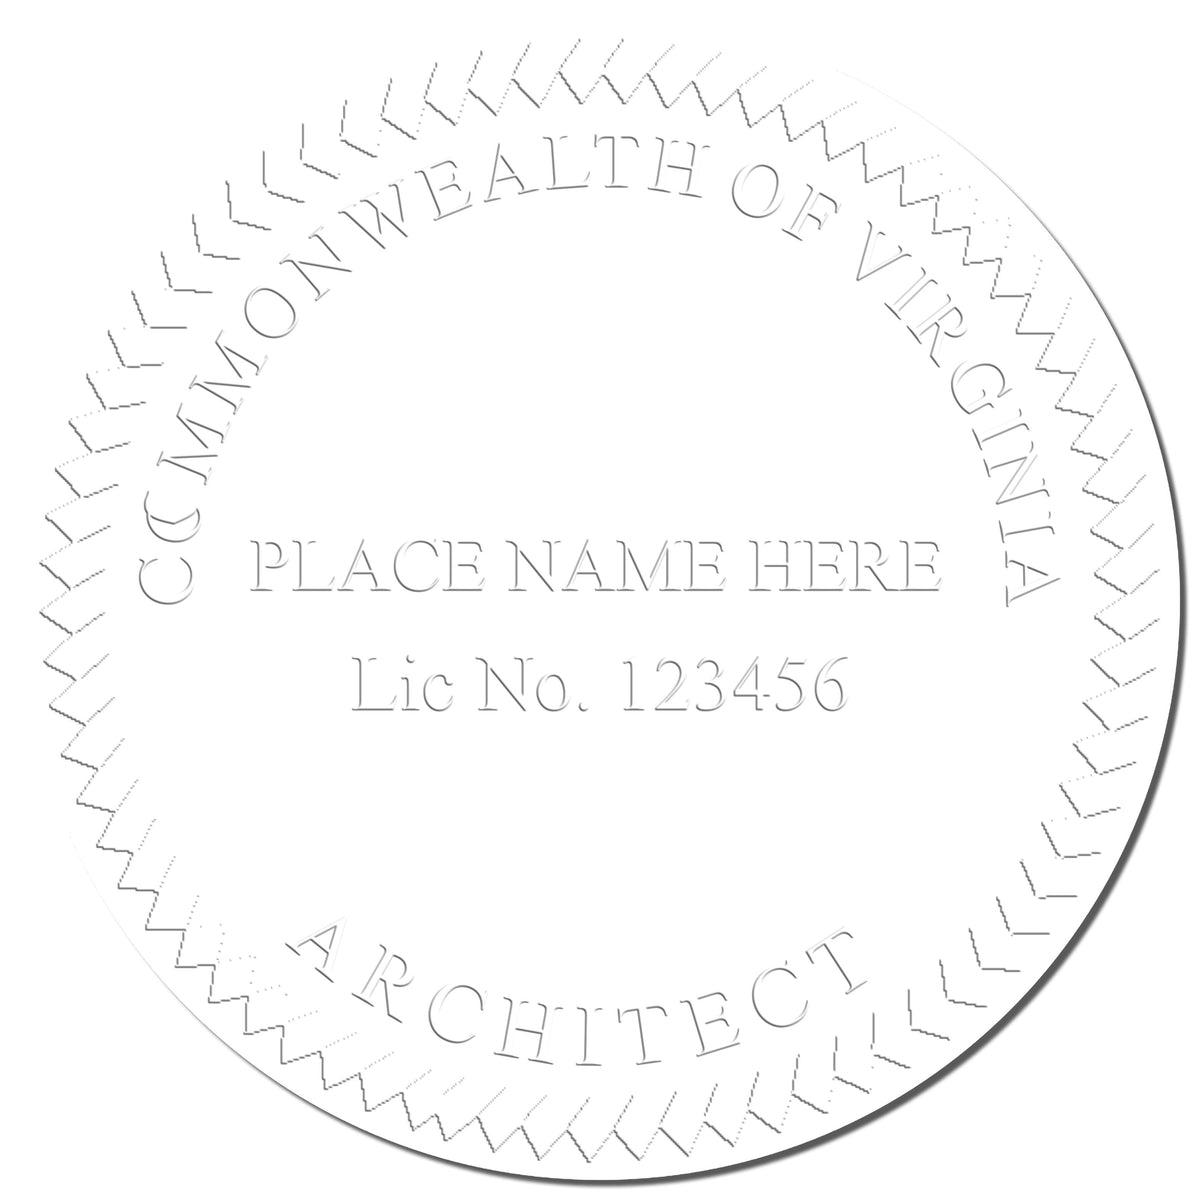 A stamped impression of the State of Virginia Long Reach Architectural Embossing Seal in this stylish lifestyle photo, setting the tone for a unique and personalized product.